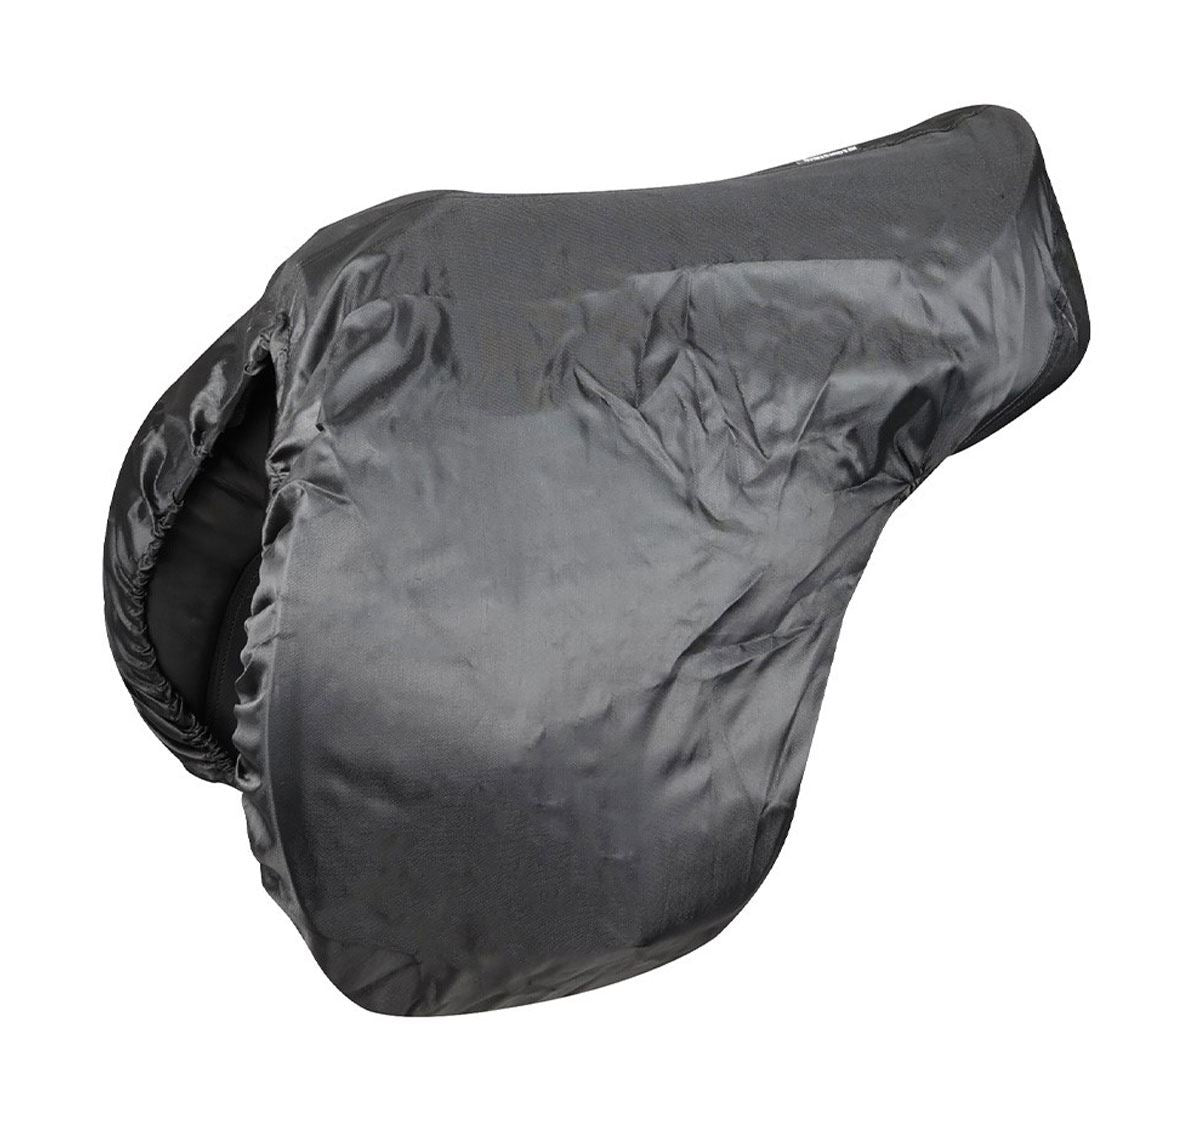 Hy Equestrian Fleece Lined Waterproof Saddle Cover - Just Horse Riders